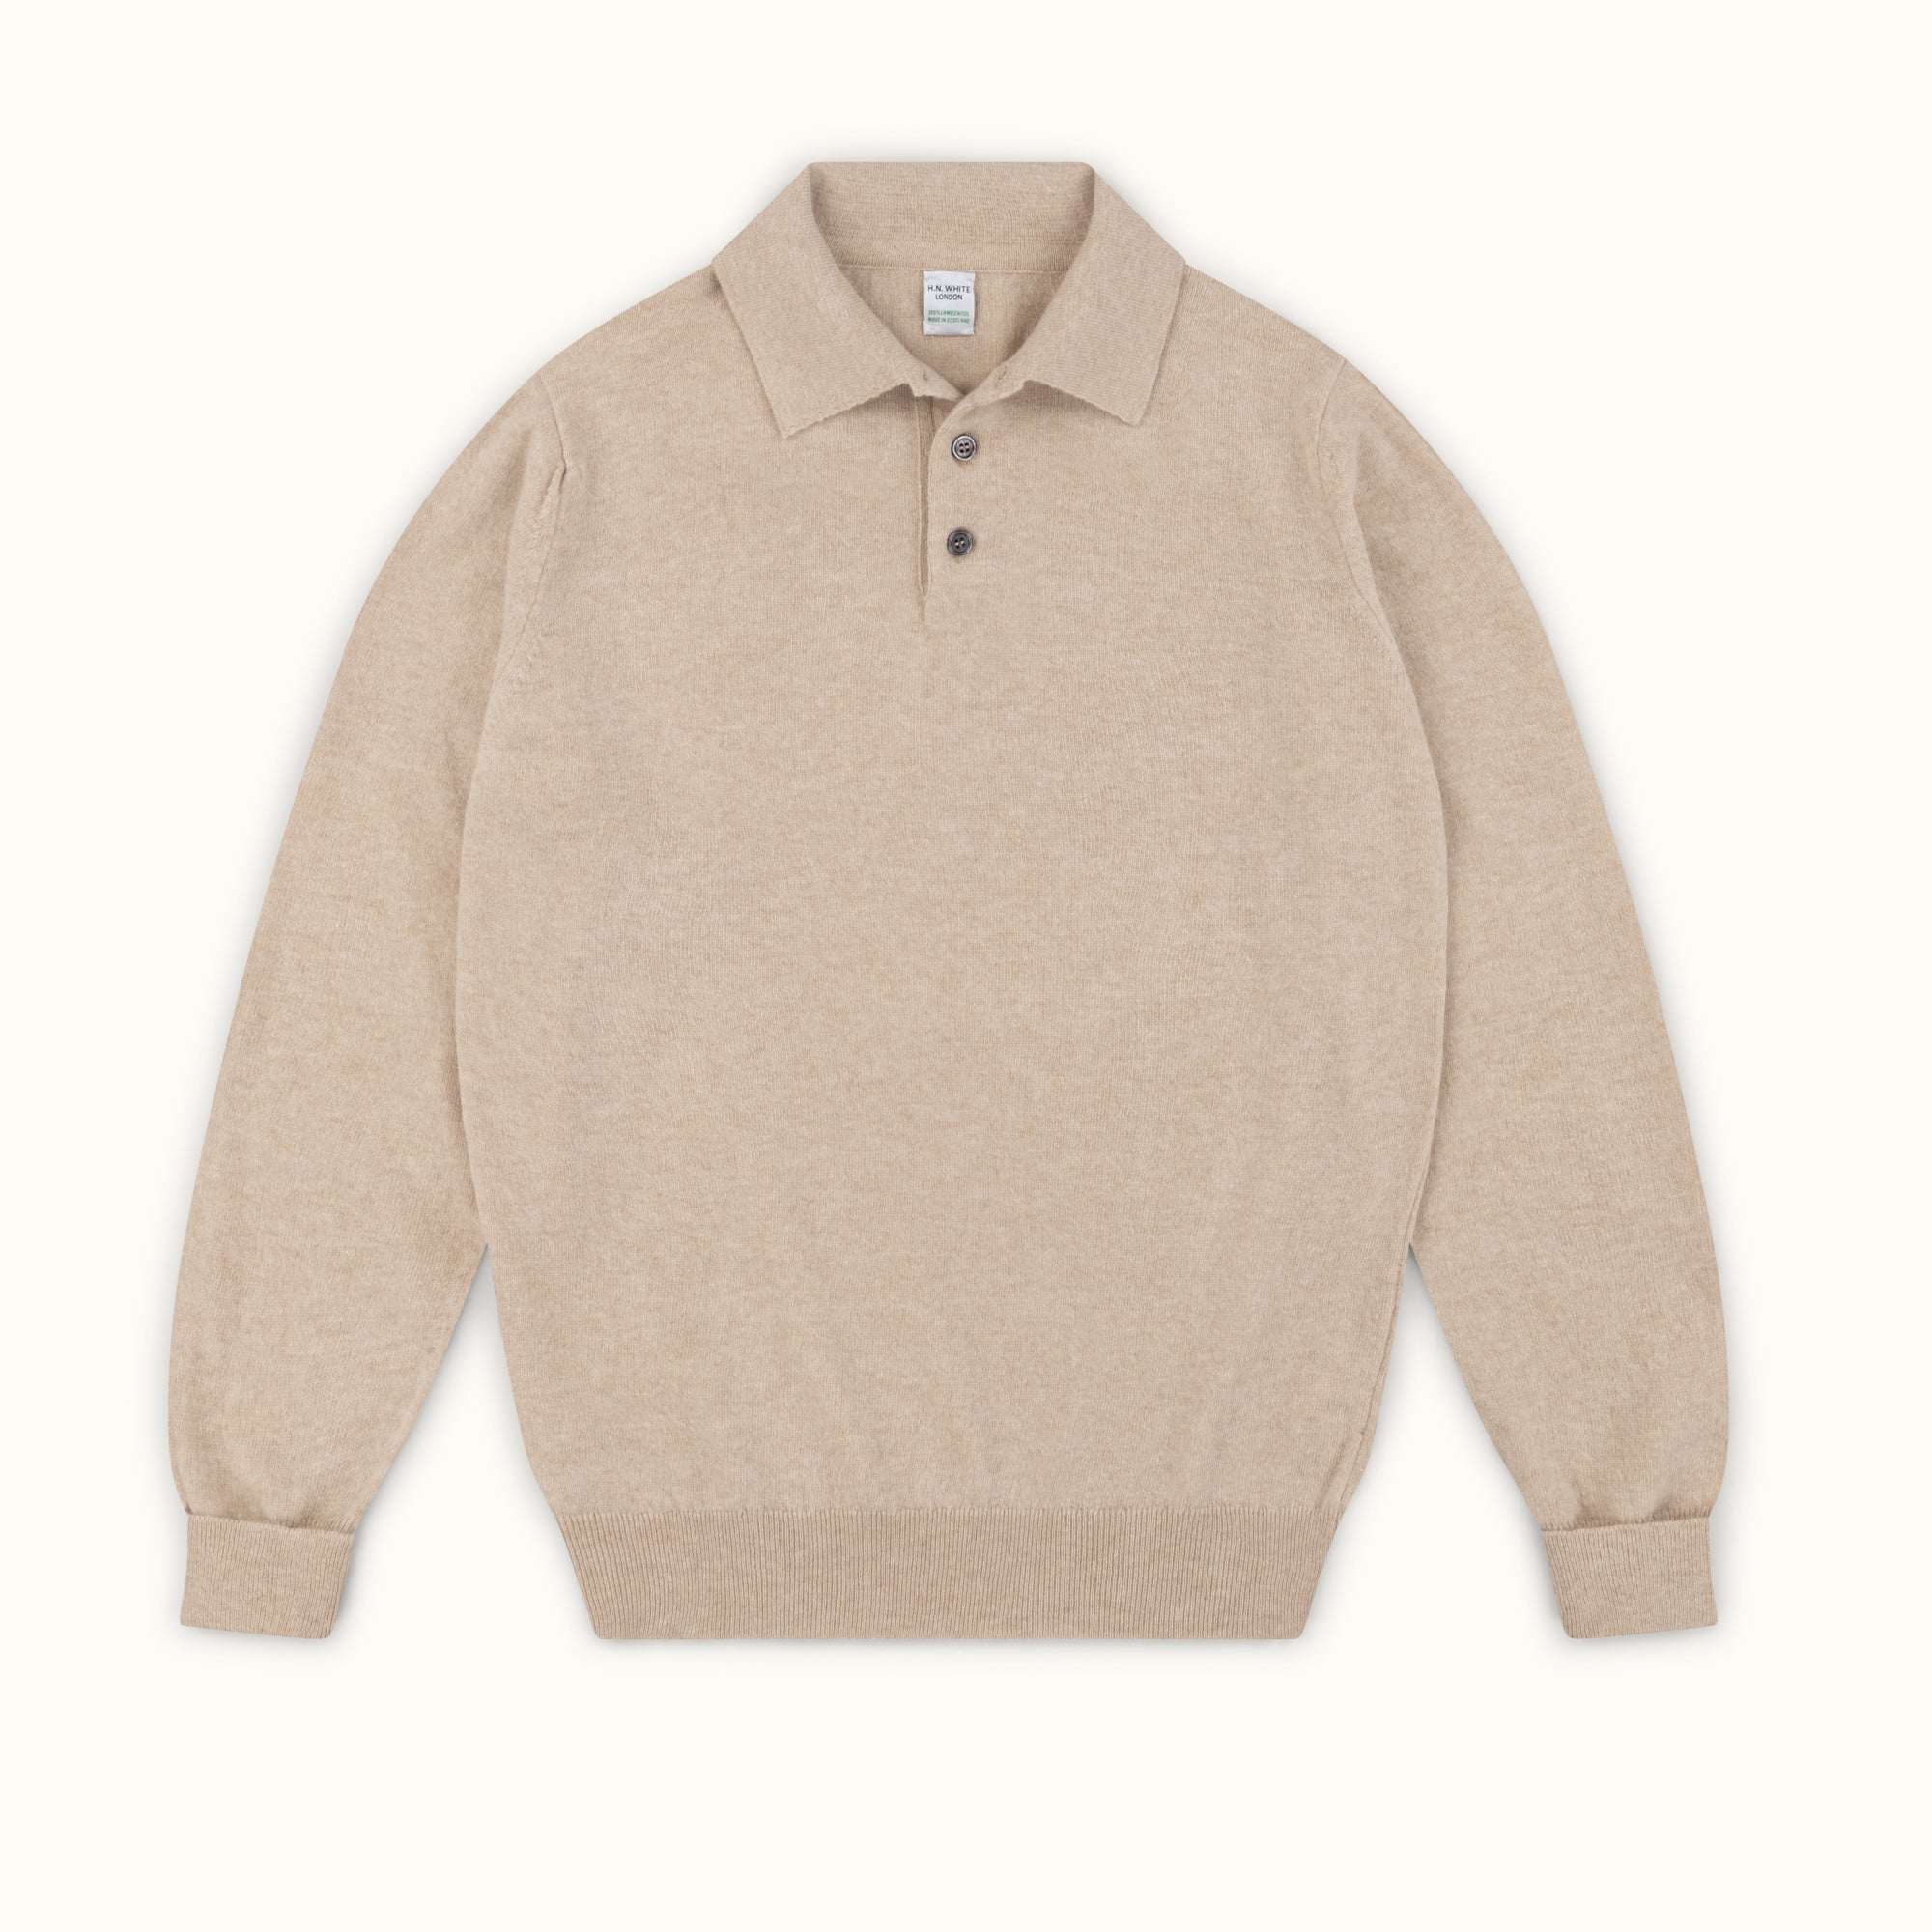 Oatmeal Geelong Knitted Polo